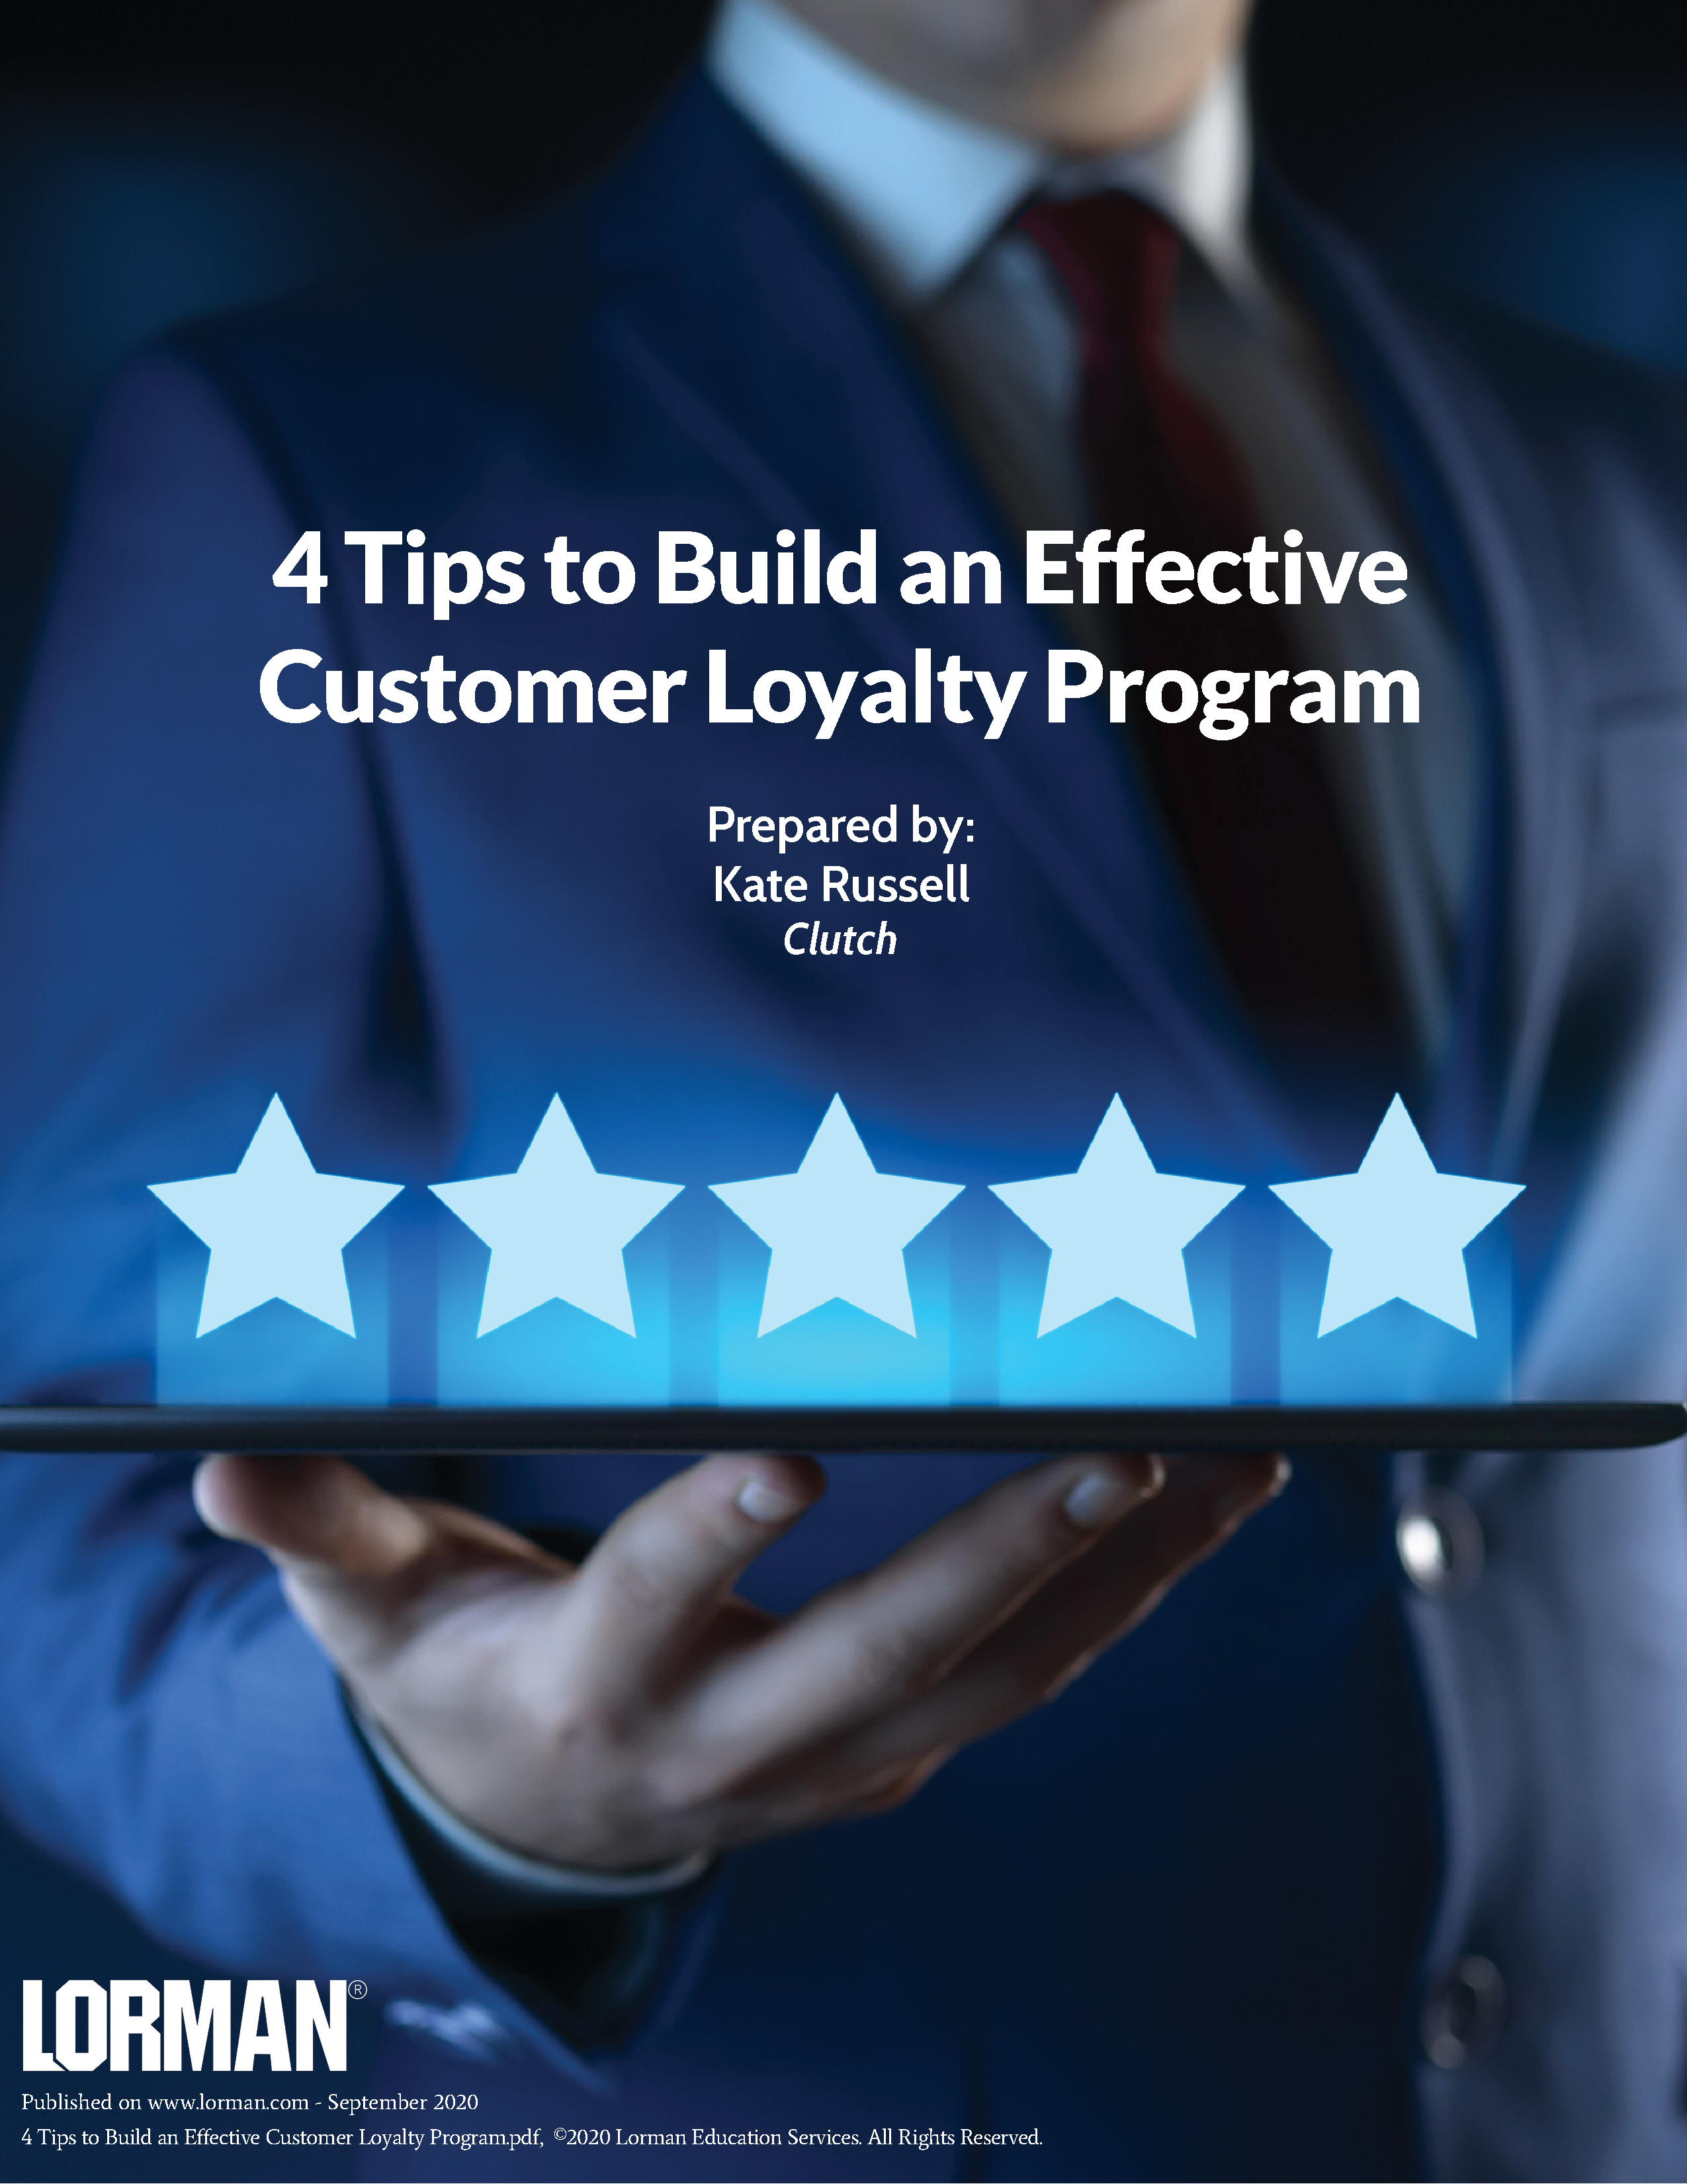 4 Tips to Build an Effective Customer Loyalty Program